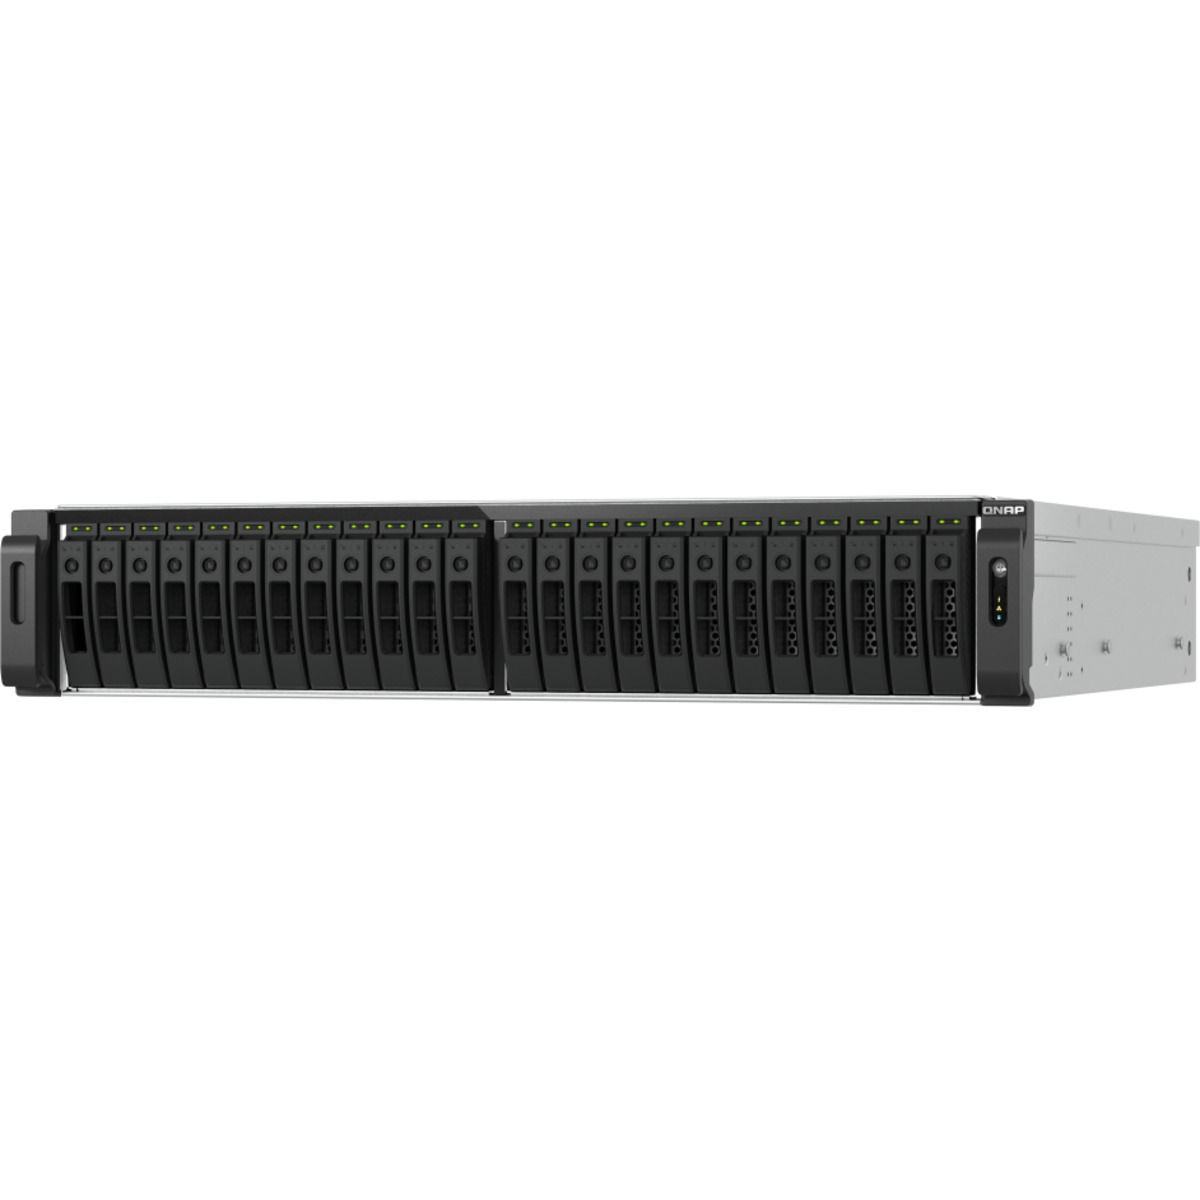 QNAP TS-h3077AFU Ryzen 7 All-Flash ZFS 60tb 30-Bay RackMount Large Business / Enterprise NAS - Network Attached Storage Device 30x2tb Samsung 870 QVO MZ-77Q2T0 2.5 560/530MB/s SATA 6Gb/s SSD CONSUMER Class Drives Installed - Burn-In Tested TS-h3077AFU Ryzen 7 All-Flash ZFS